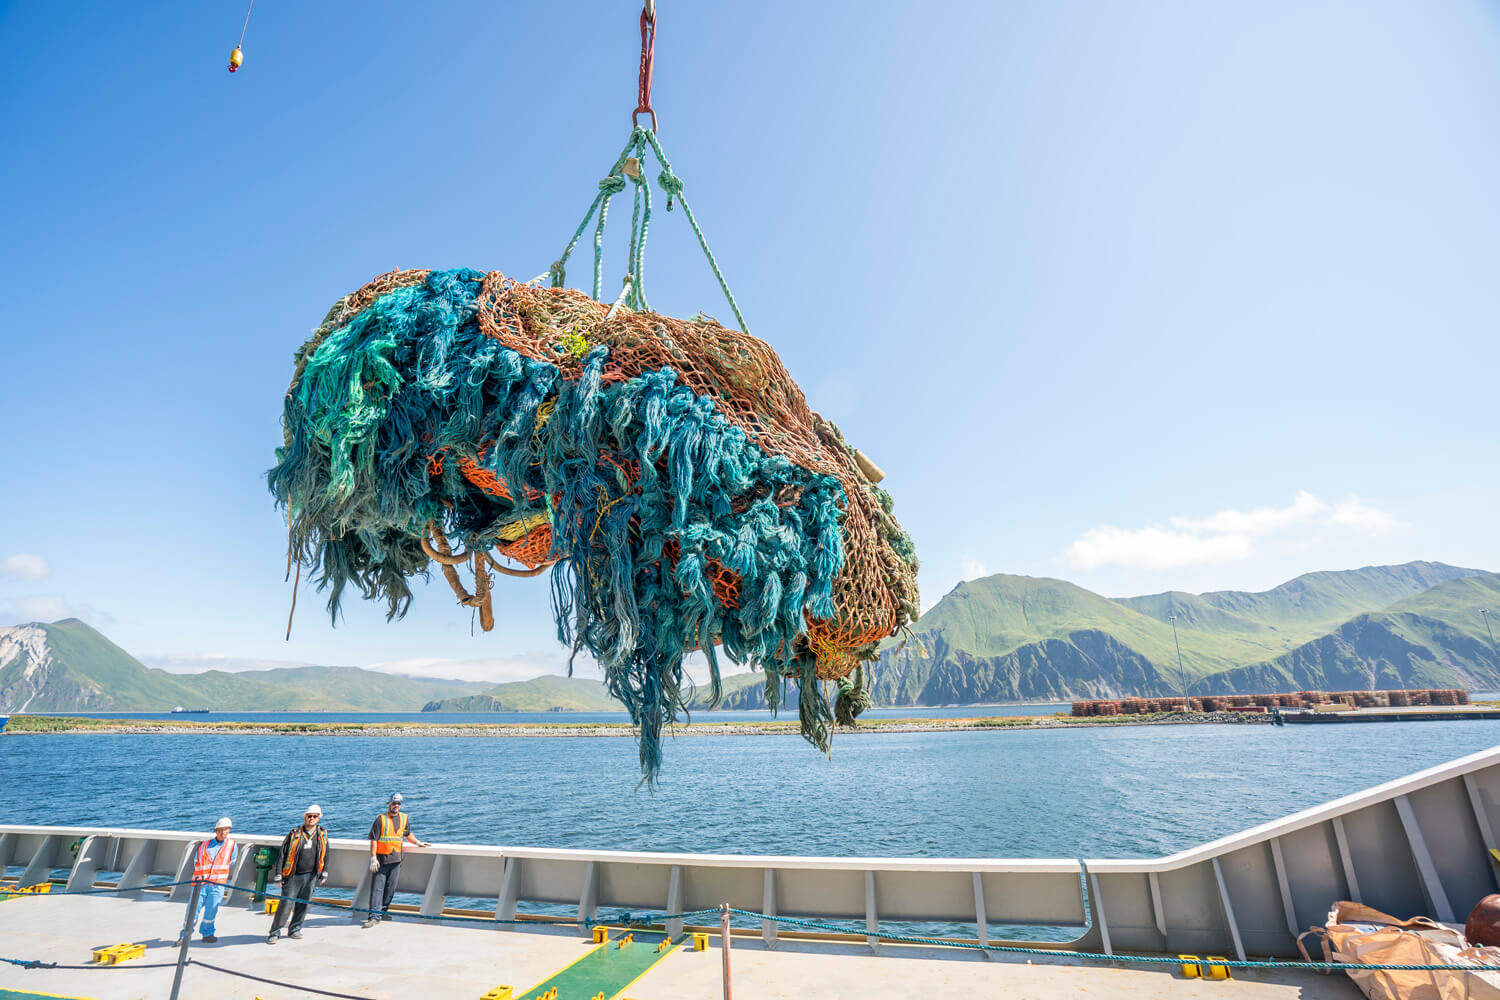 Removing plastic waste, in form of fishing nets, from the ocean | RSP Inc.